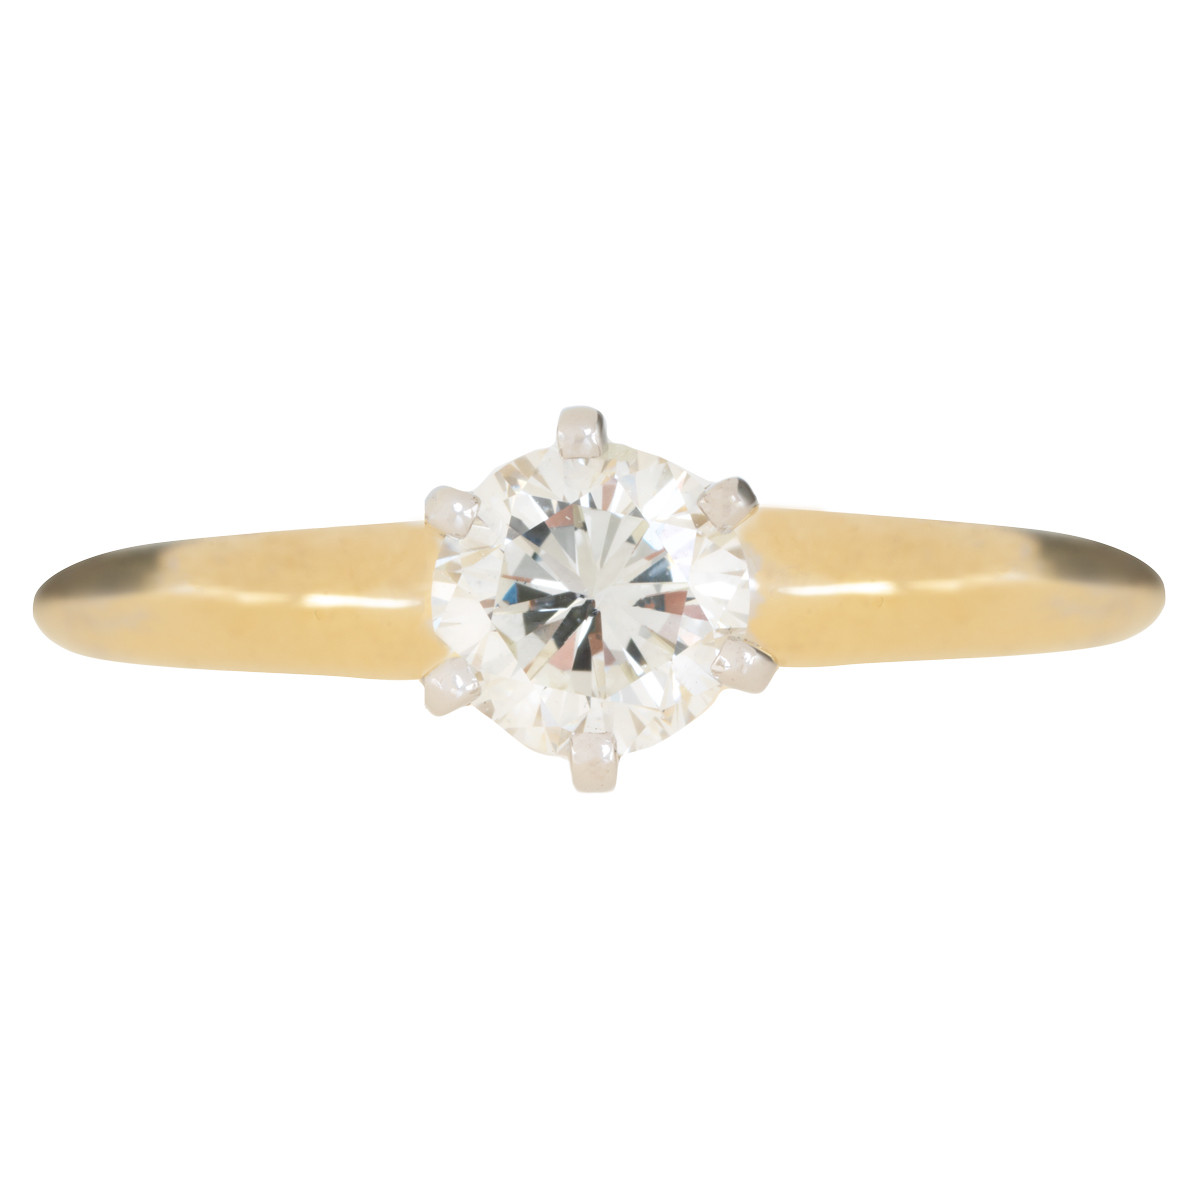 Vintage 0.51 CTW Diamond Engagement Ring - Shop Jewelry, Watches ...